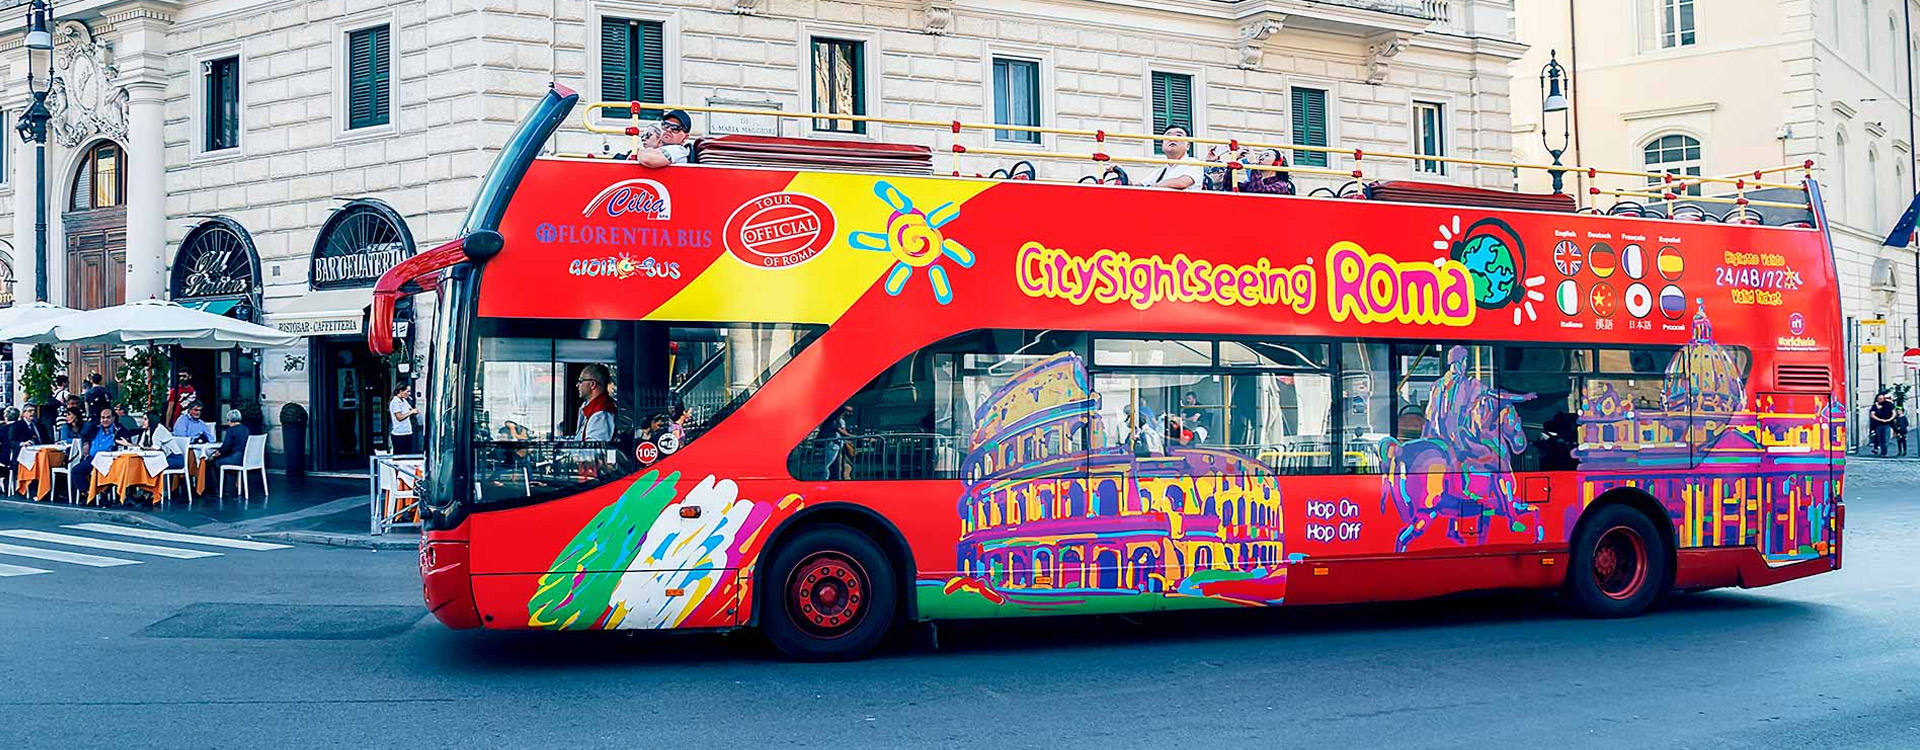 Travel Around The City On A Hop-On-Hop-Off Bus